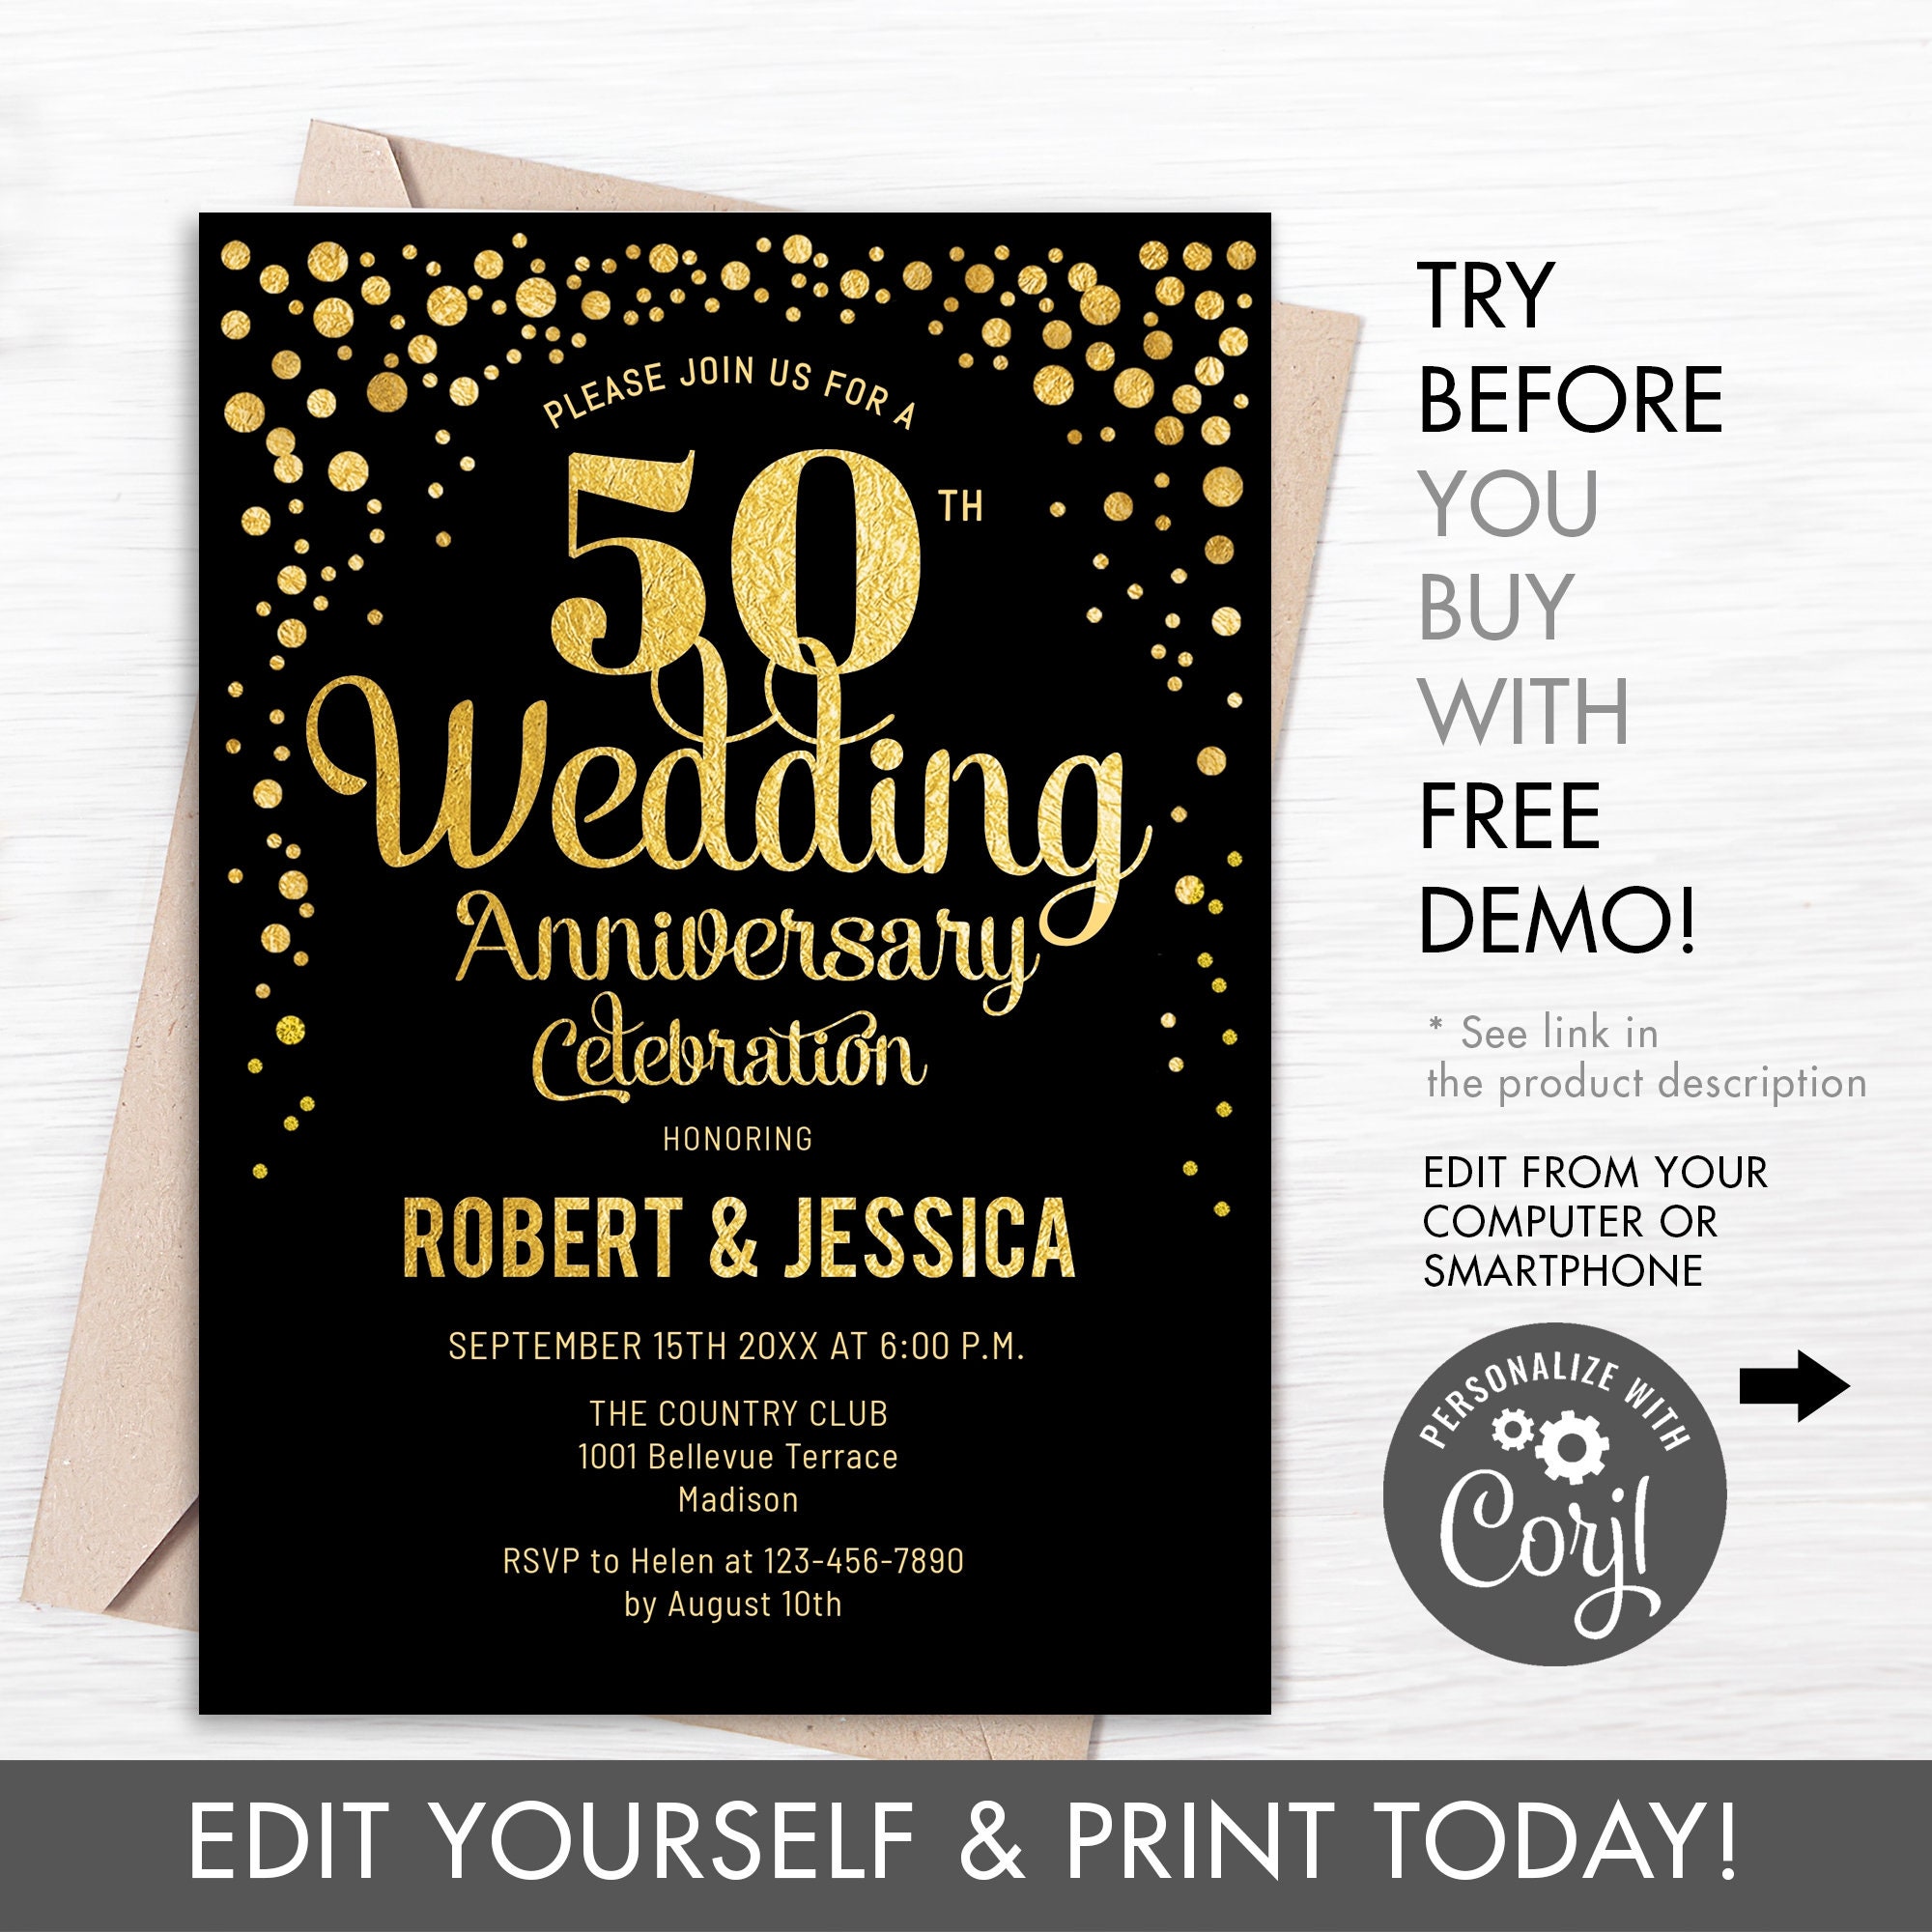 50 Wedding Invitation Cards size 5X7 Printed in Black with